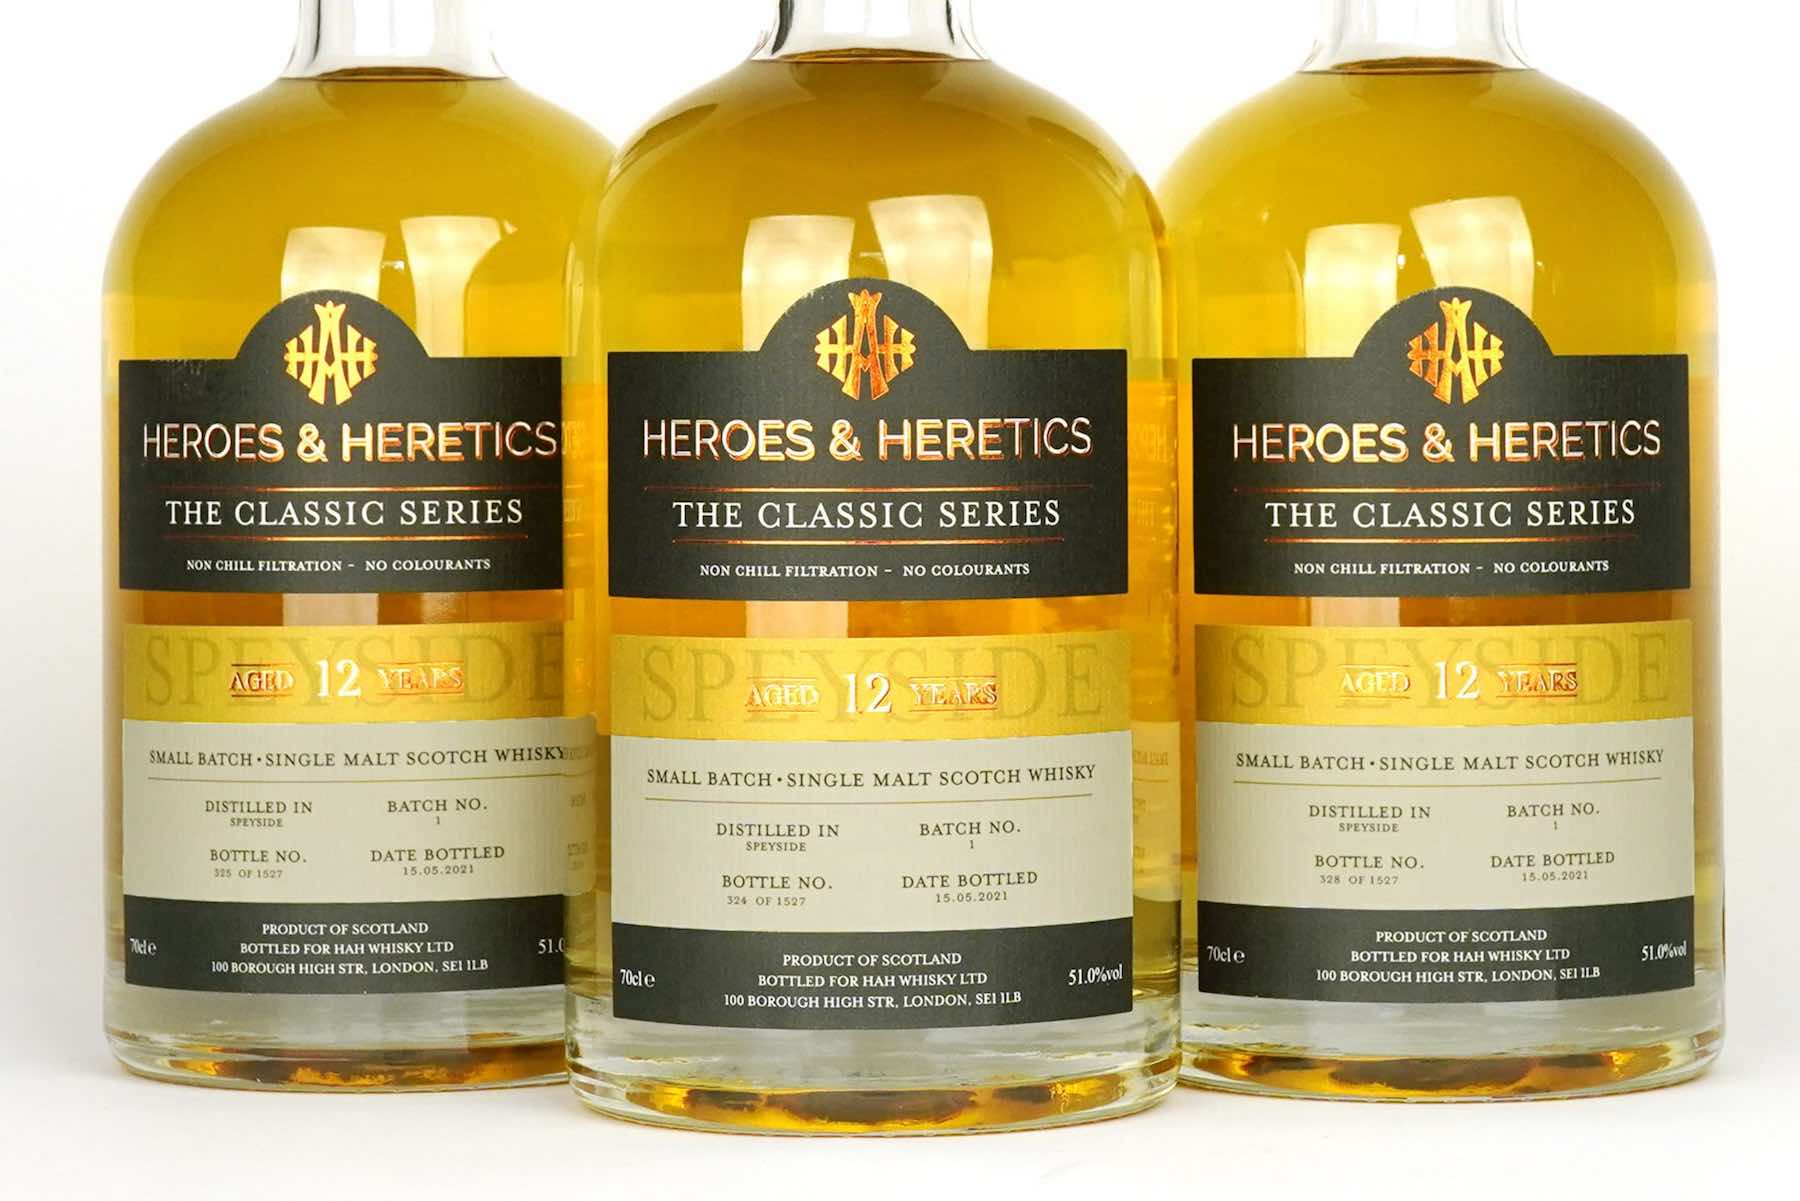 Heroes and Heretics The Classic Series, Speyside, Review and Tasting Notes